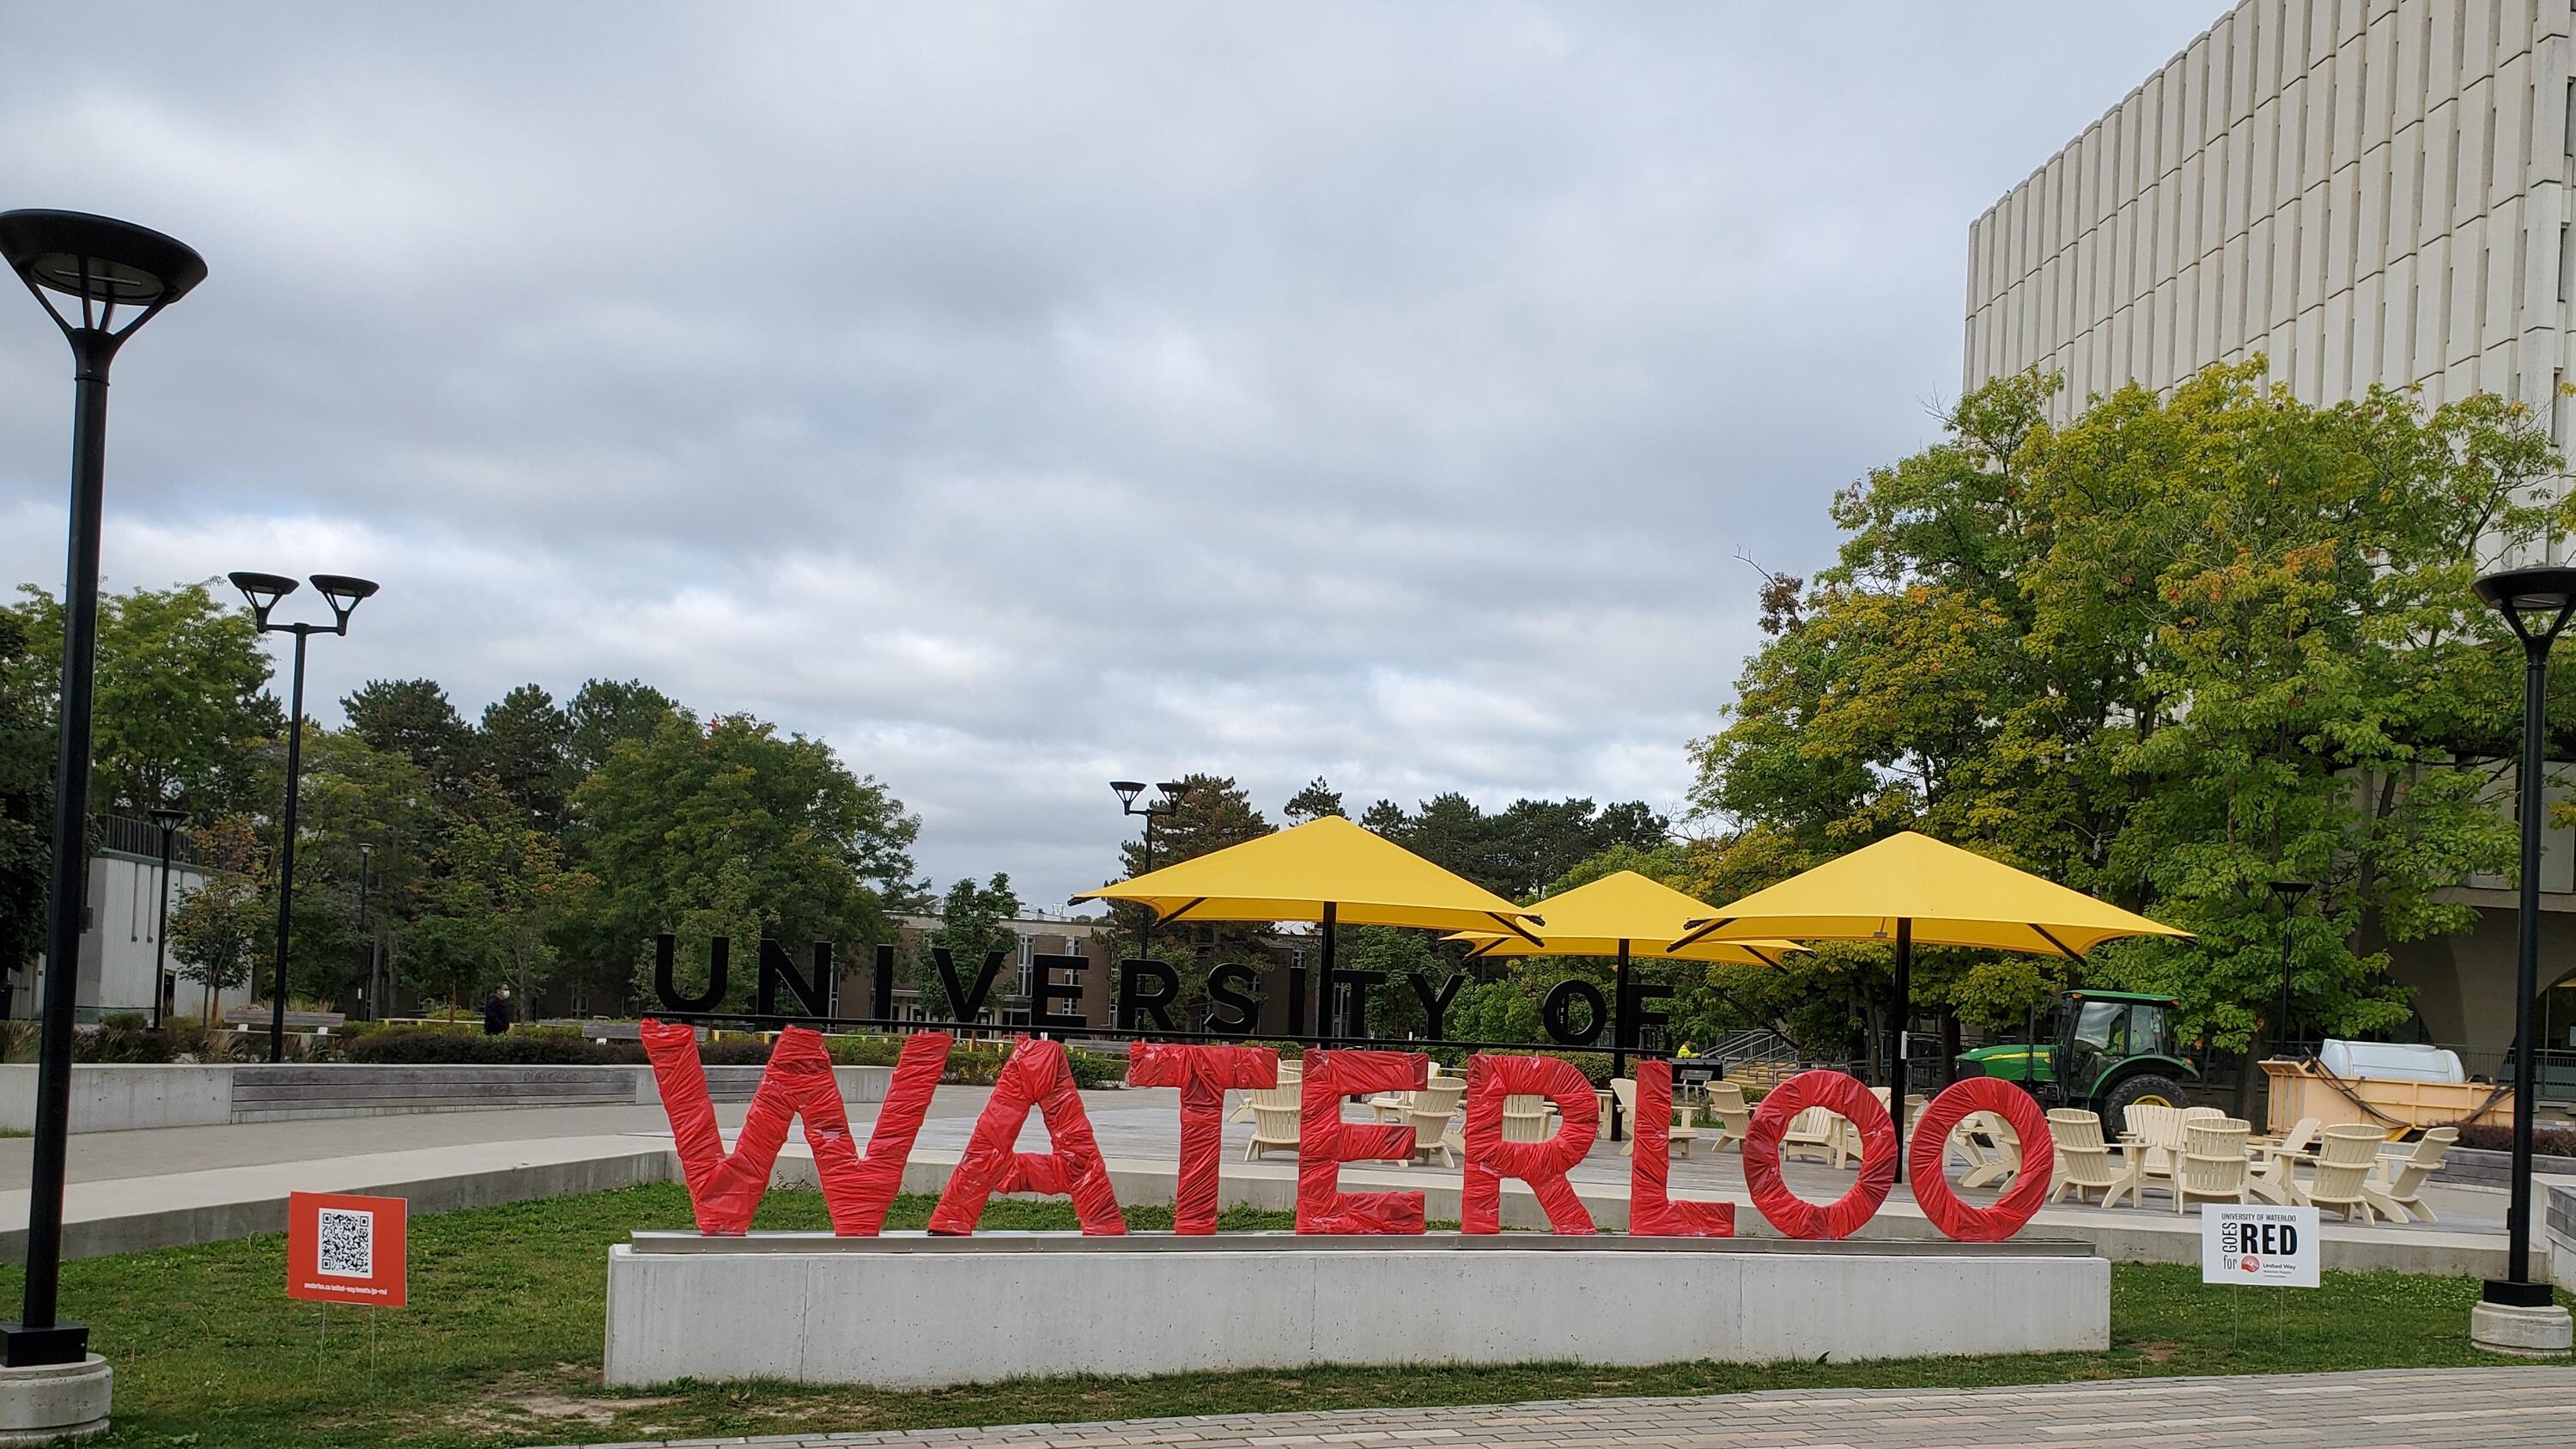 UWaterloo sign wrapped in red for United Way